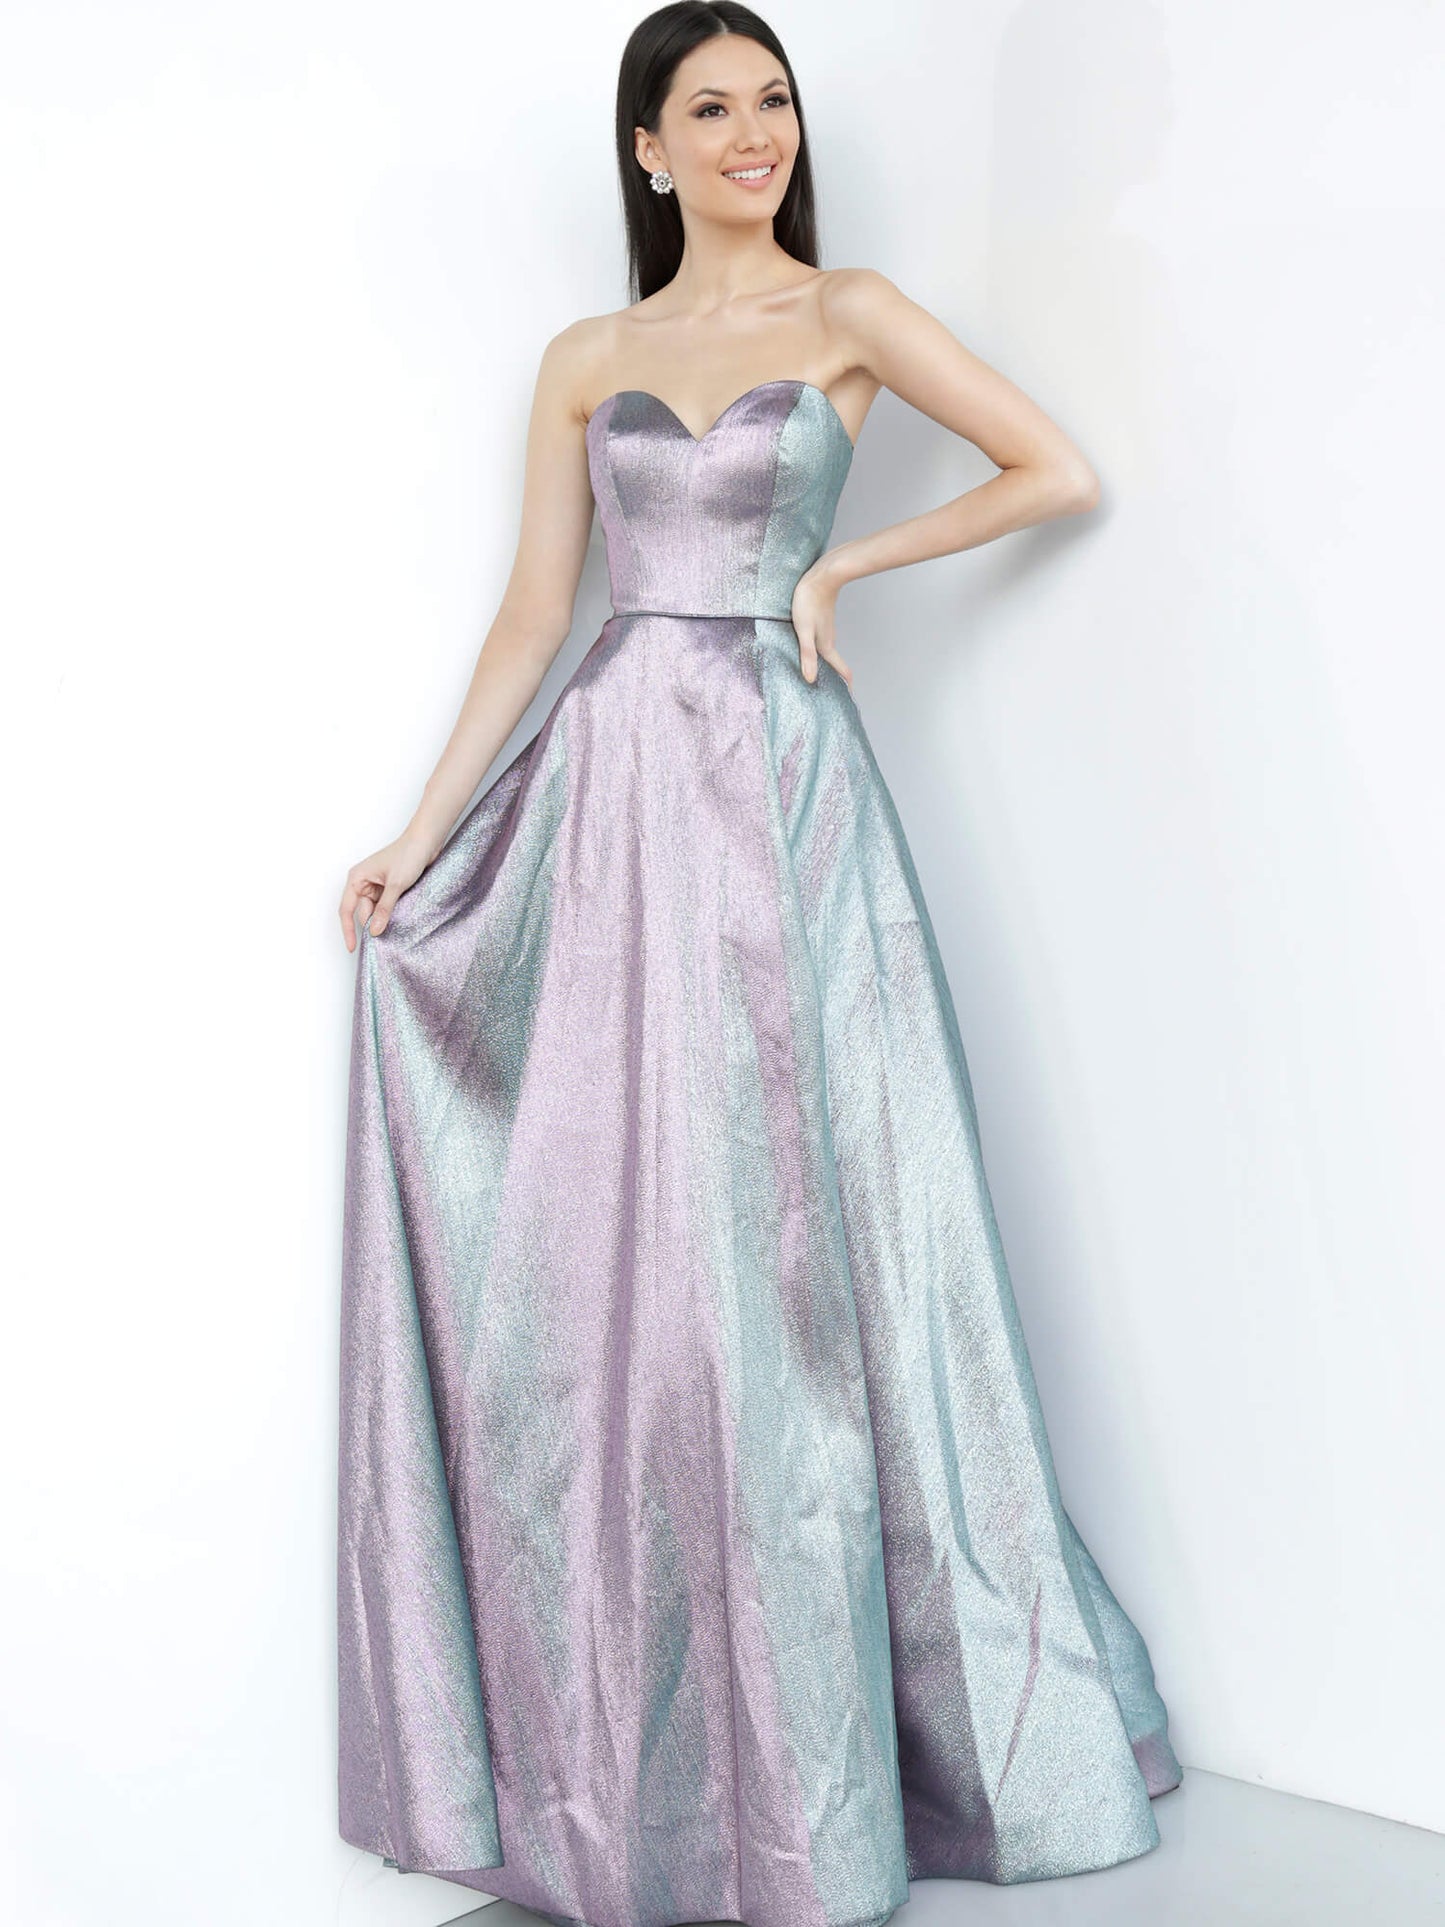 JVN by Jovani 3775 Iridescent Long Prom Dress High Slit A line Sweetheart Neckline - Color Changing Fabric! Evening gown 